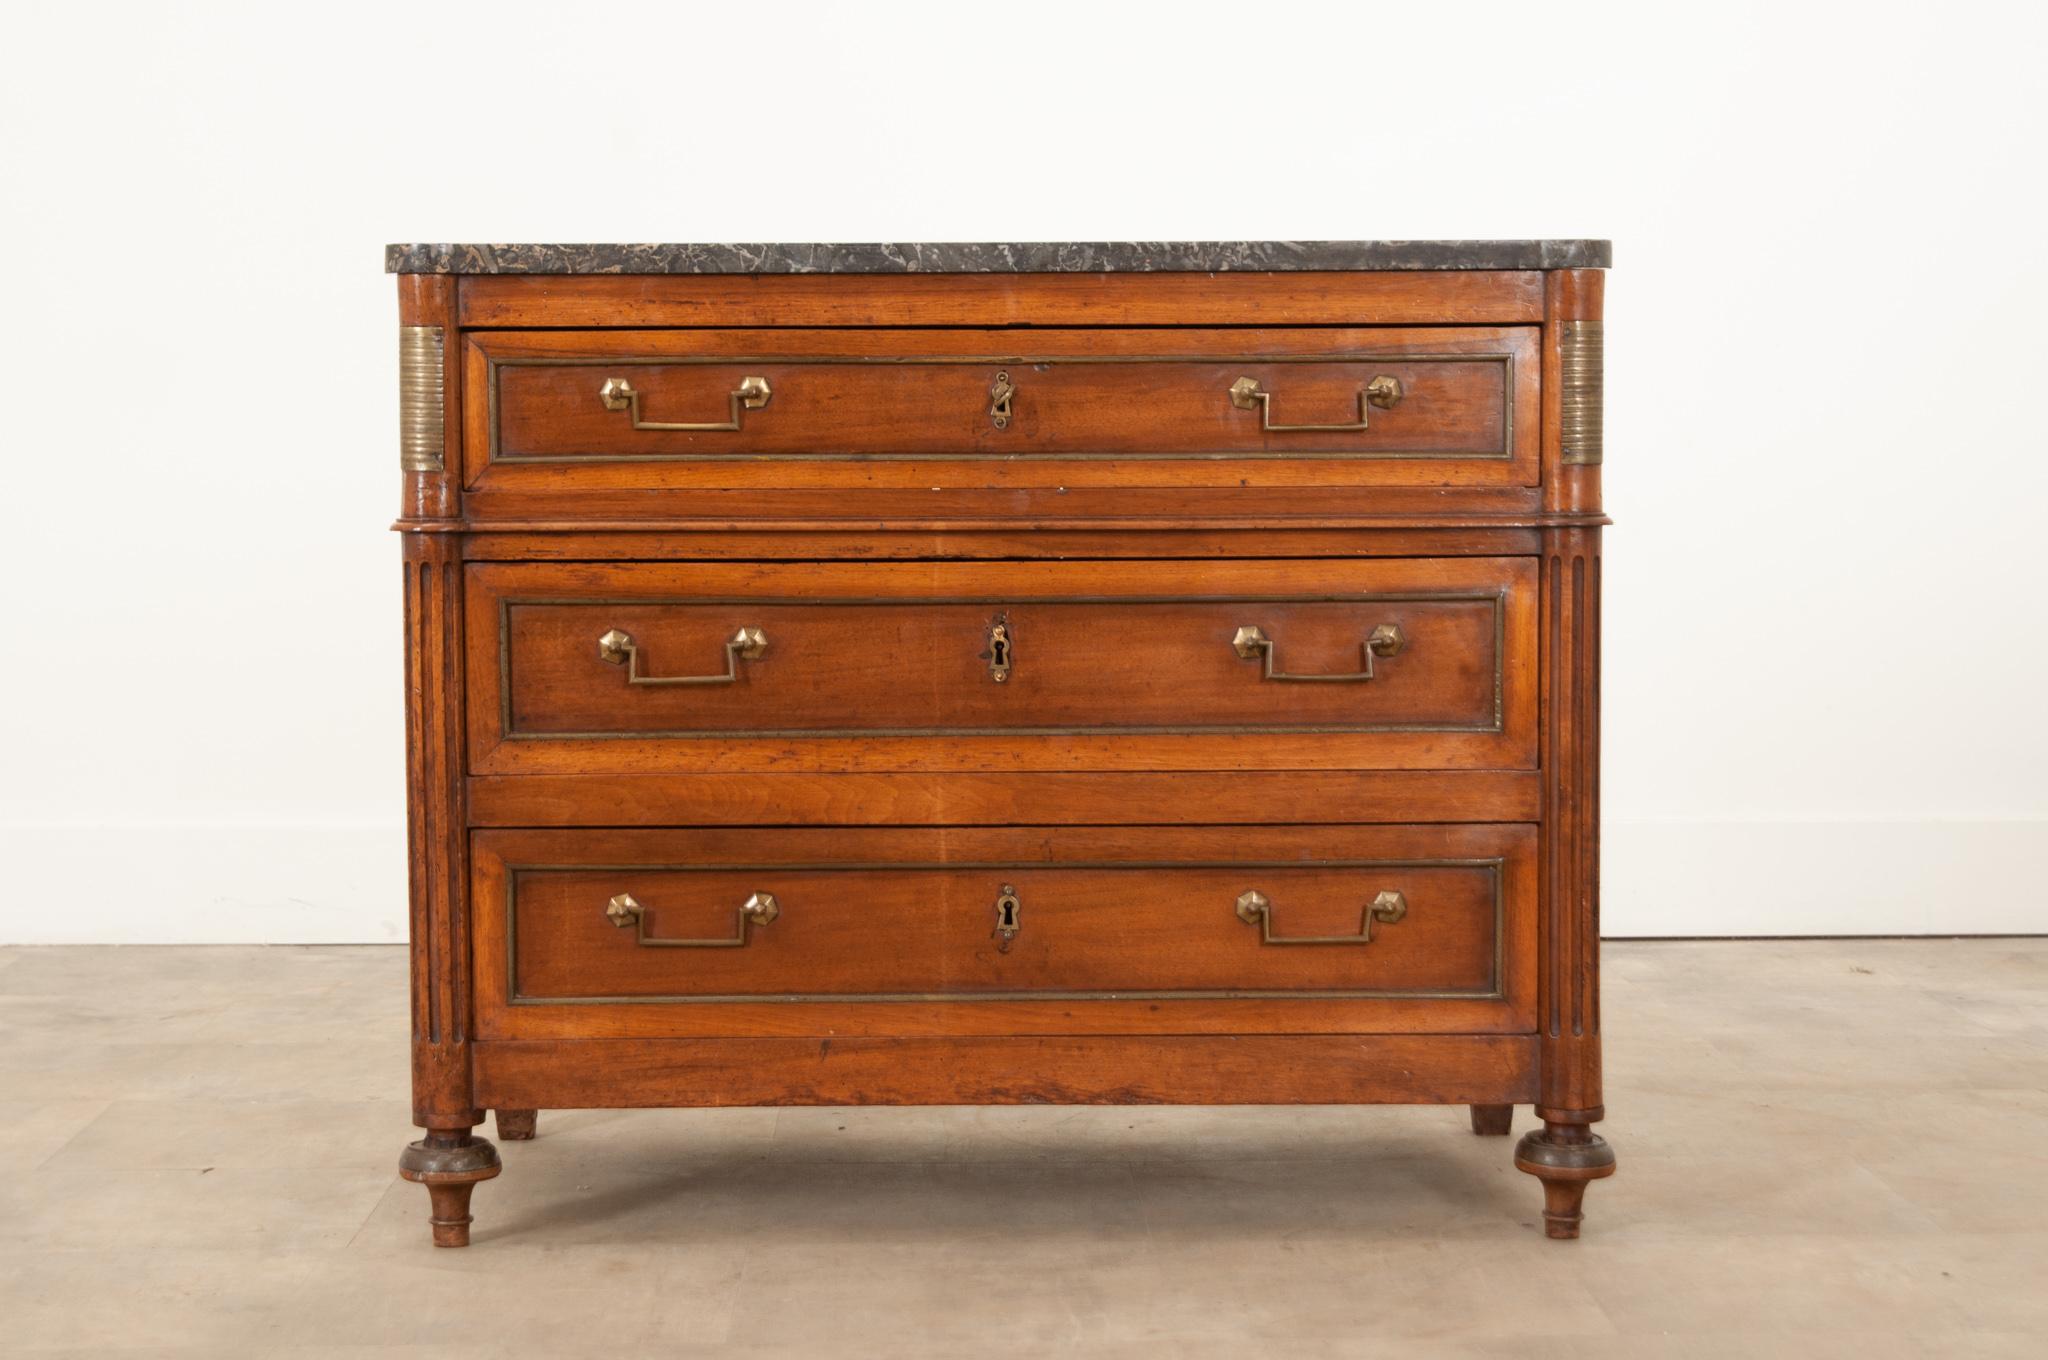 A petite 19th Century Louis XVI style commode hand-crafted in France circa 1860. This stylish case piece is made of mahogany and topped with its original, removable, shaped marble top that has incredibly gorgeous gray patterns throughout. A bank of